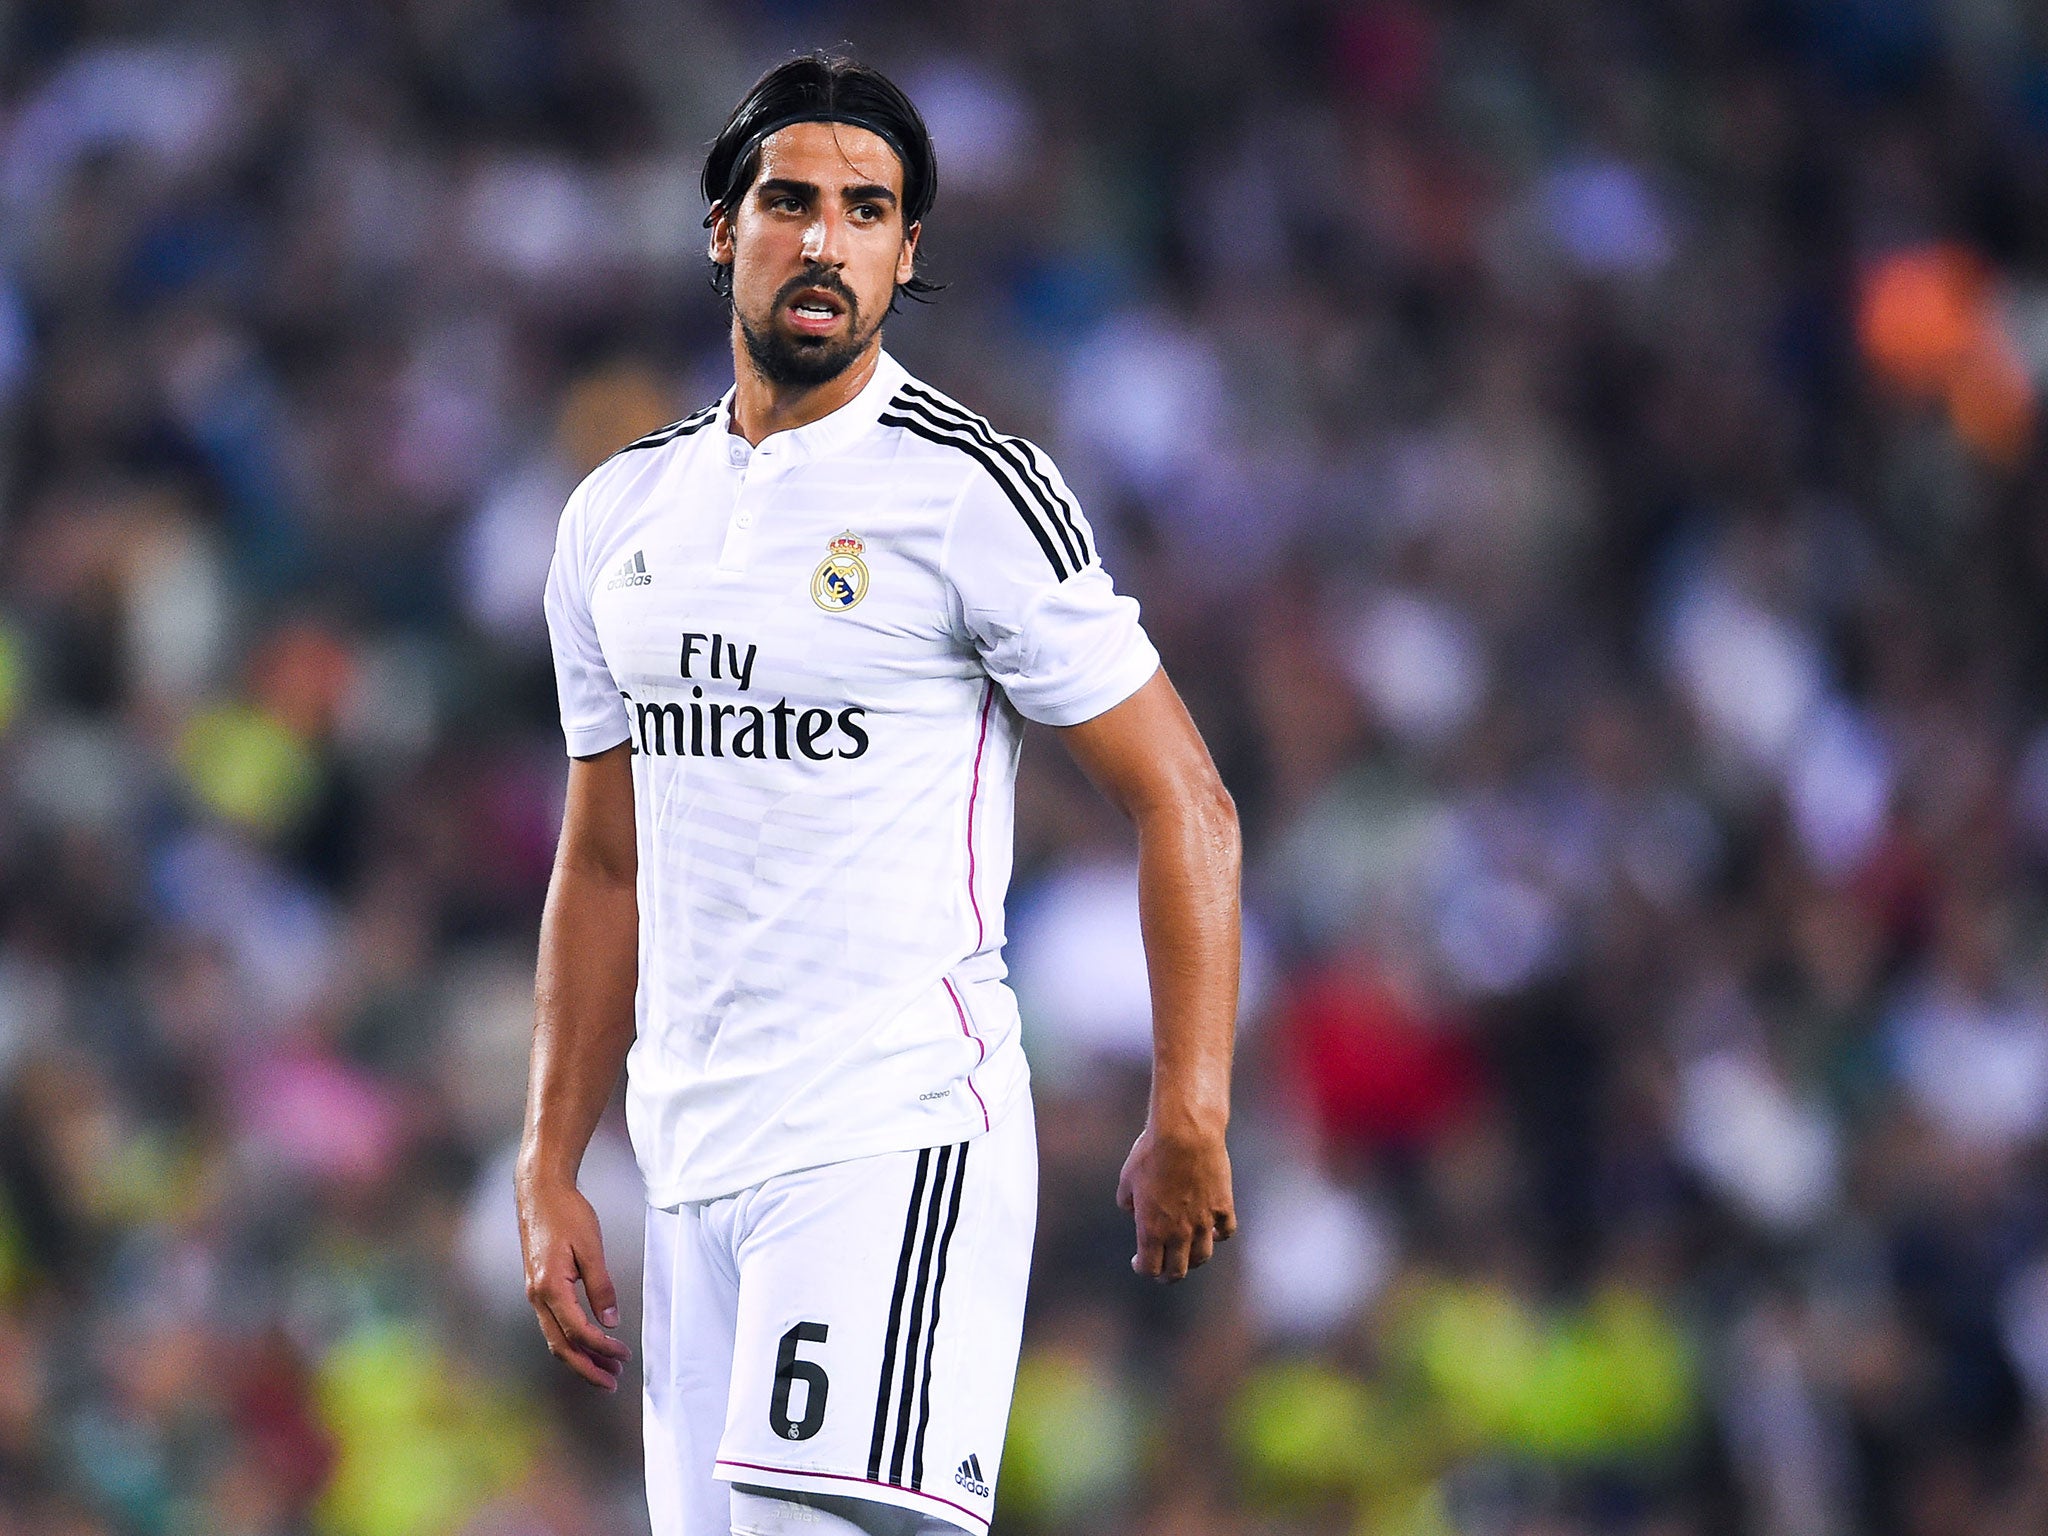 Sami Khedira has reportedly agreed a deal with Bayern Munich